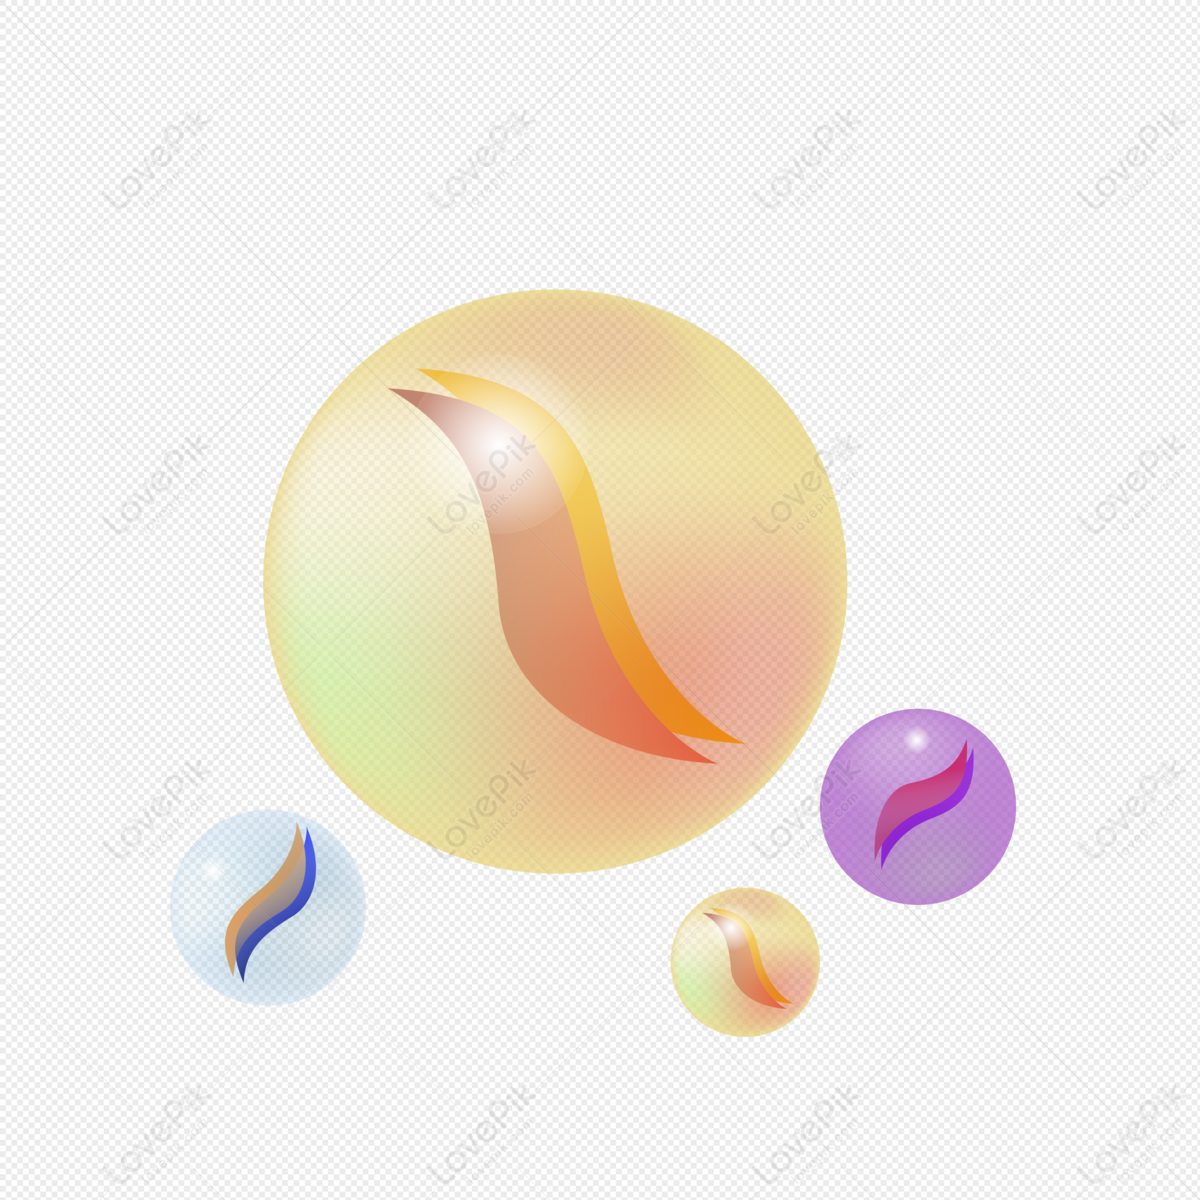 marbles game clipart border